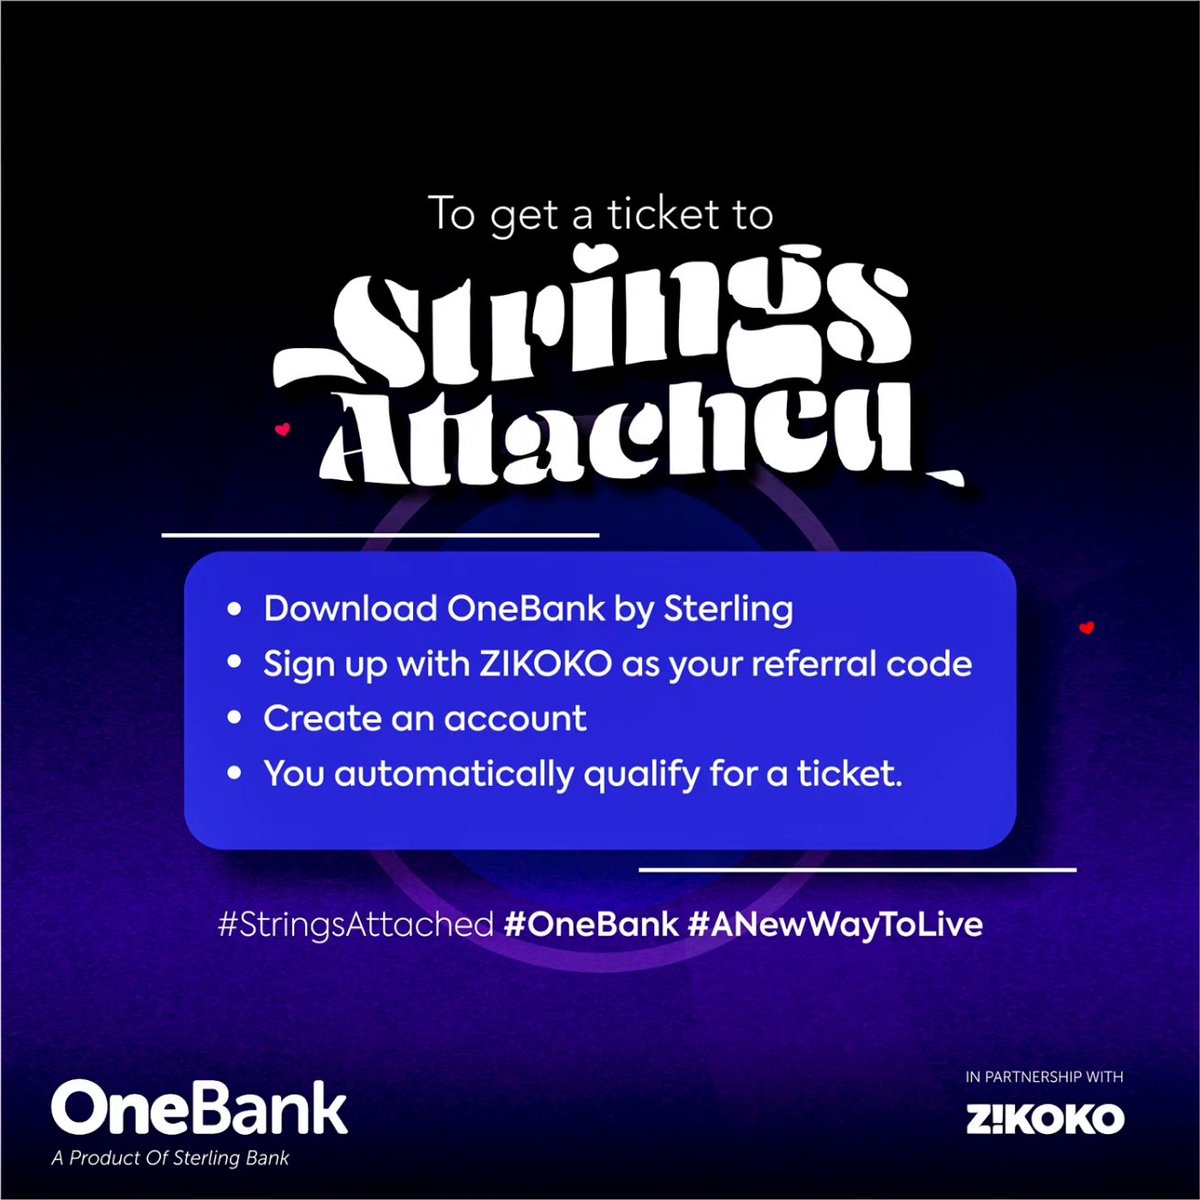 What song do you want to see Johnny Drille perform at #StringsAttached party on Saturday? Tell us in the comment section and tag him. #OneBank #OneBankBySterling #ANewWayToLive